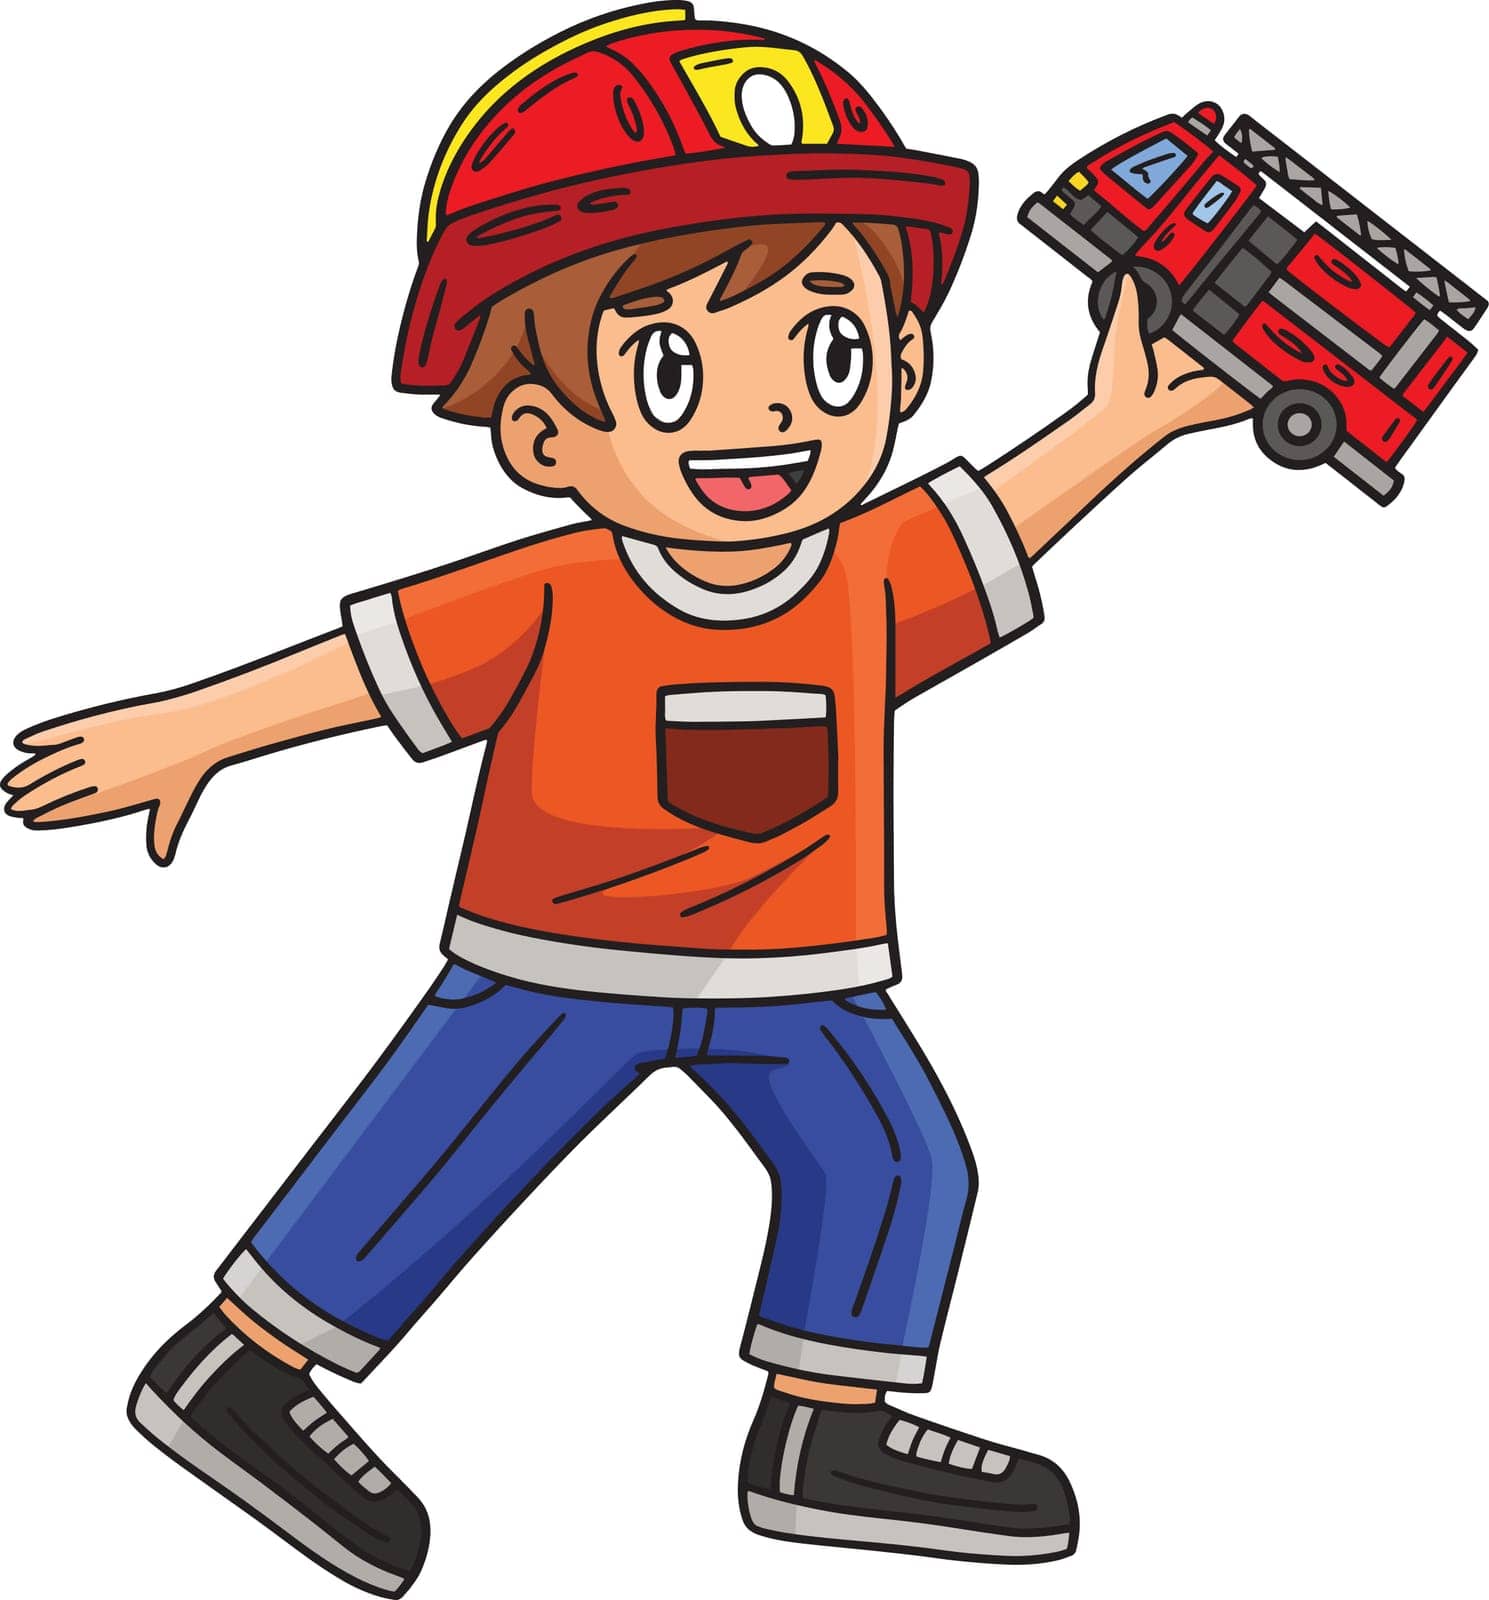 Child with Firefighter Truck Toy Cartoon Clipart by abbydesign